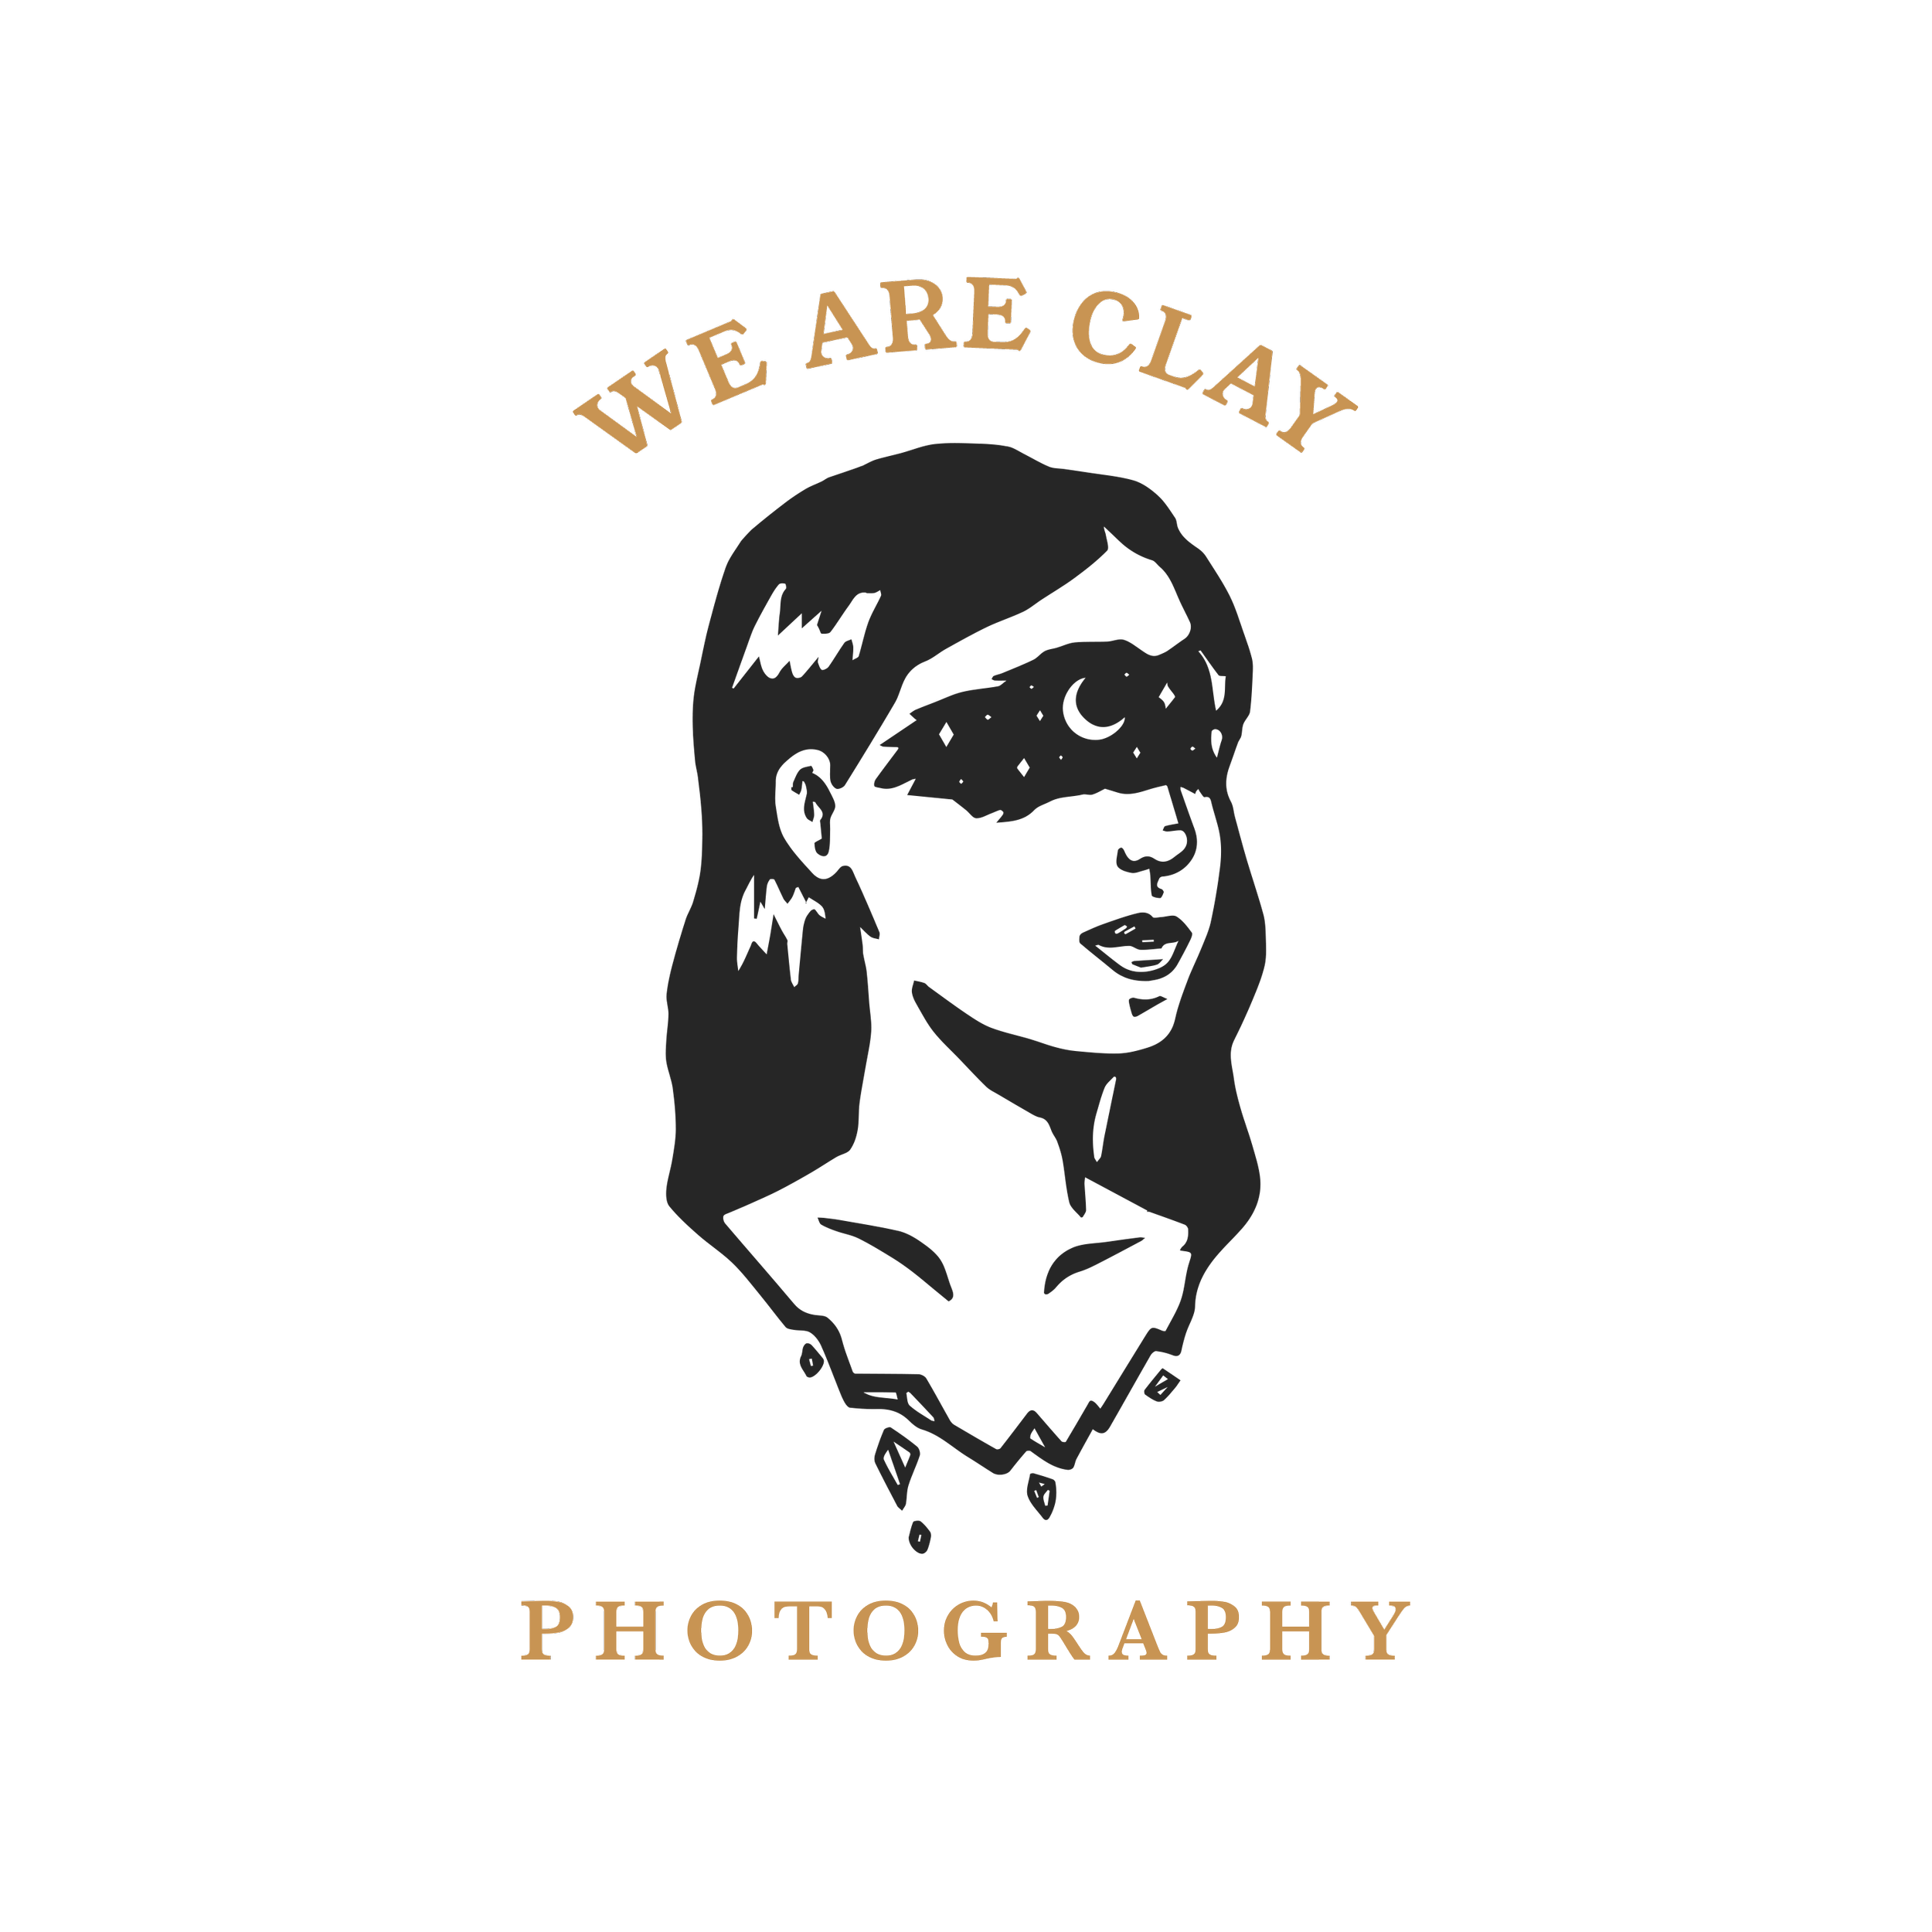 We Are Clay Photography